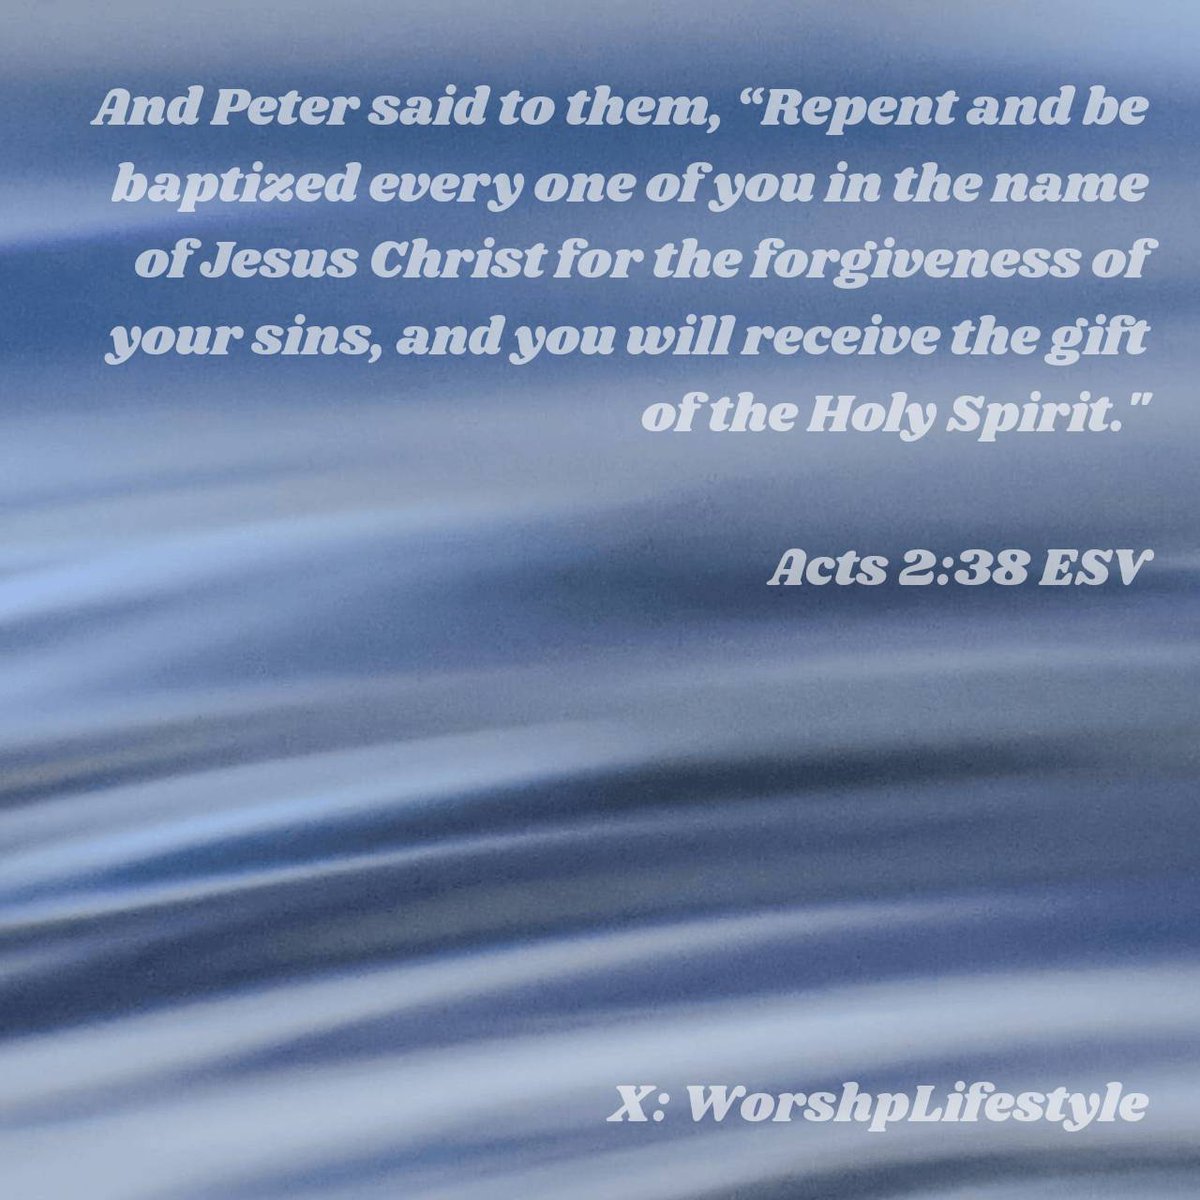 Acts 2:38
And Peter said to them, “Repent and be baptized every one of you in the name of Jesus Christ for the forgiveness of your sins, and you will receive the gift of the Holy Spirit.'

bible.com/bible/59/act.2…
#VerseOfTheDay #BibleVerse #WorshpLifestyle #WorshipLifestyle